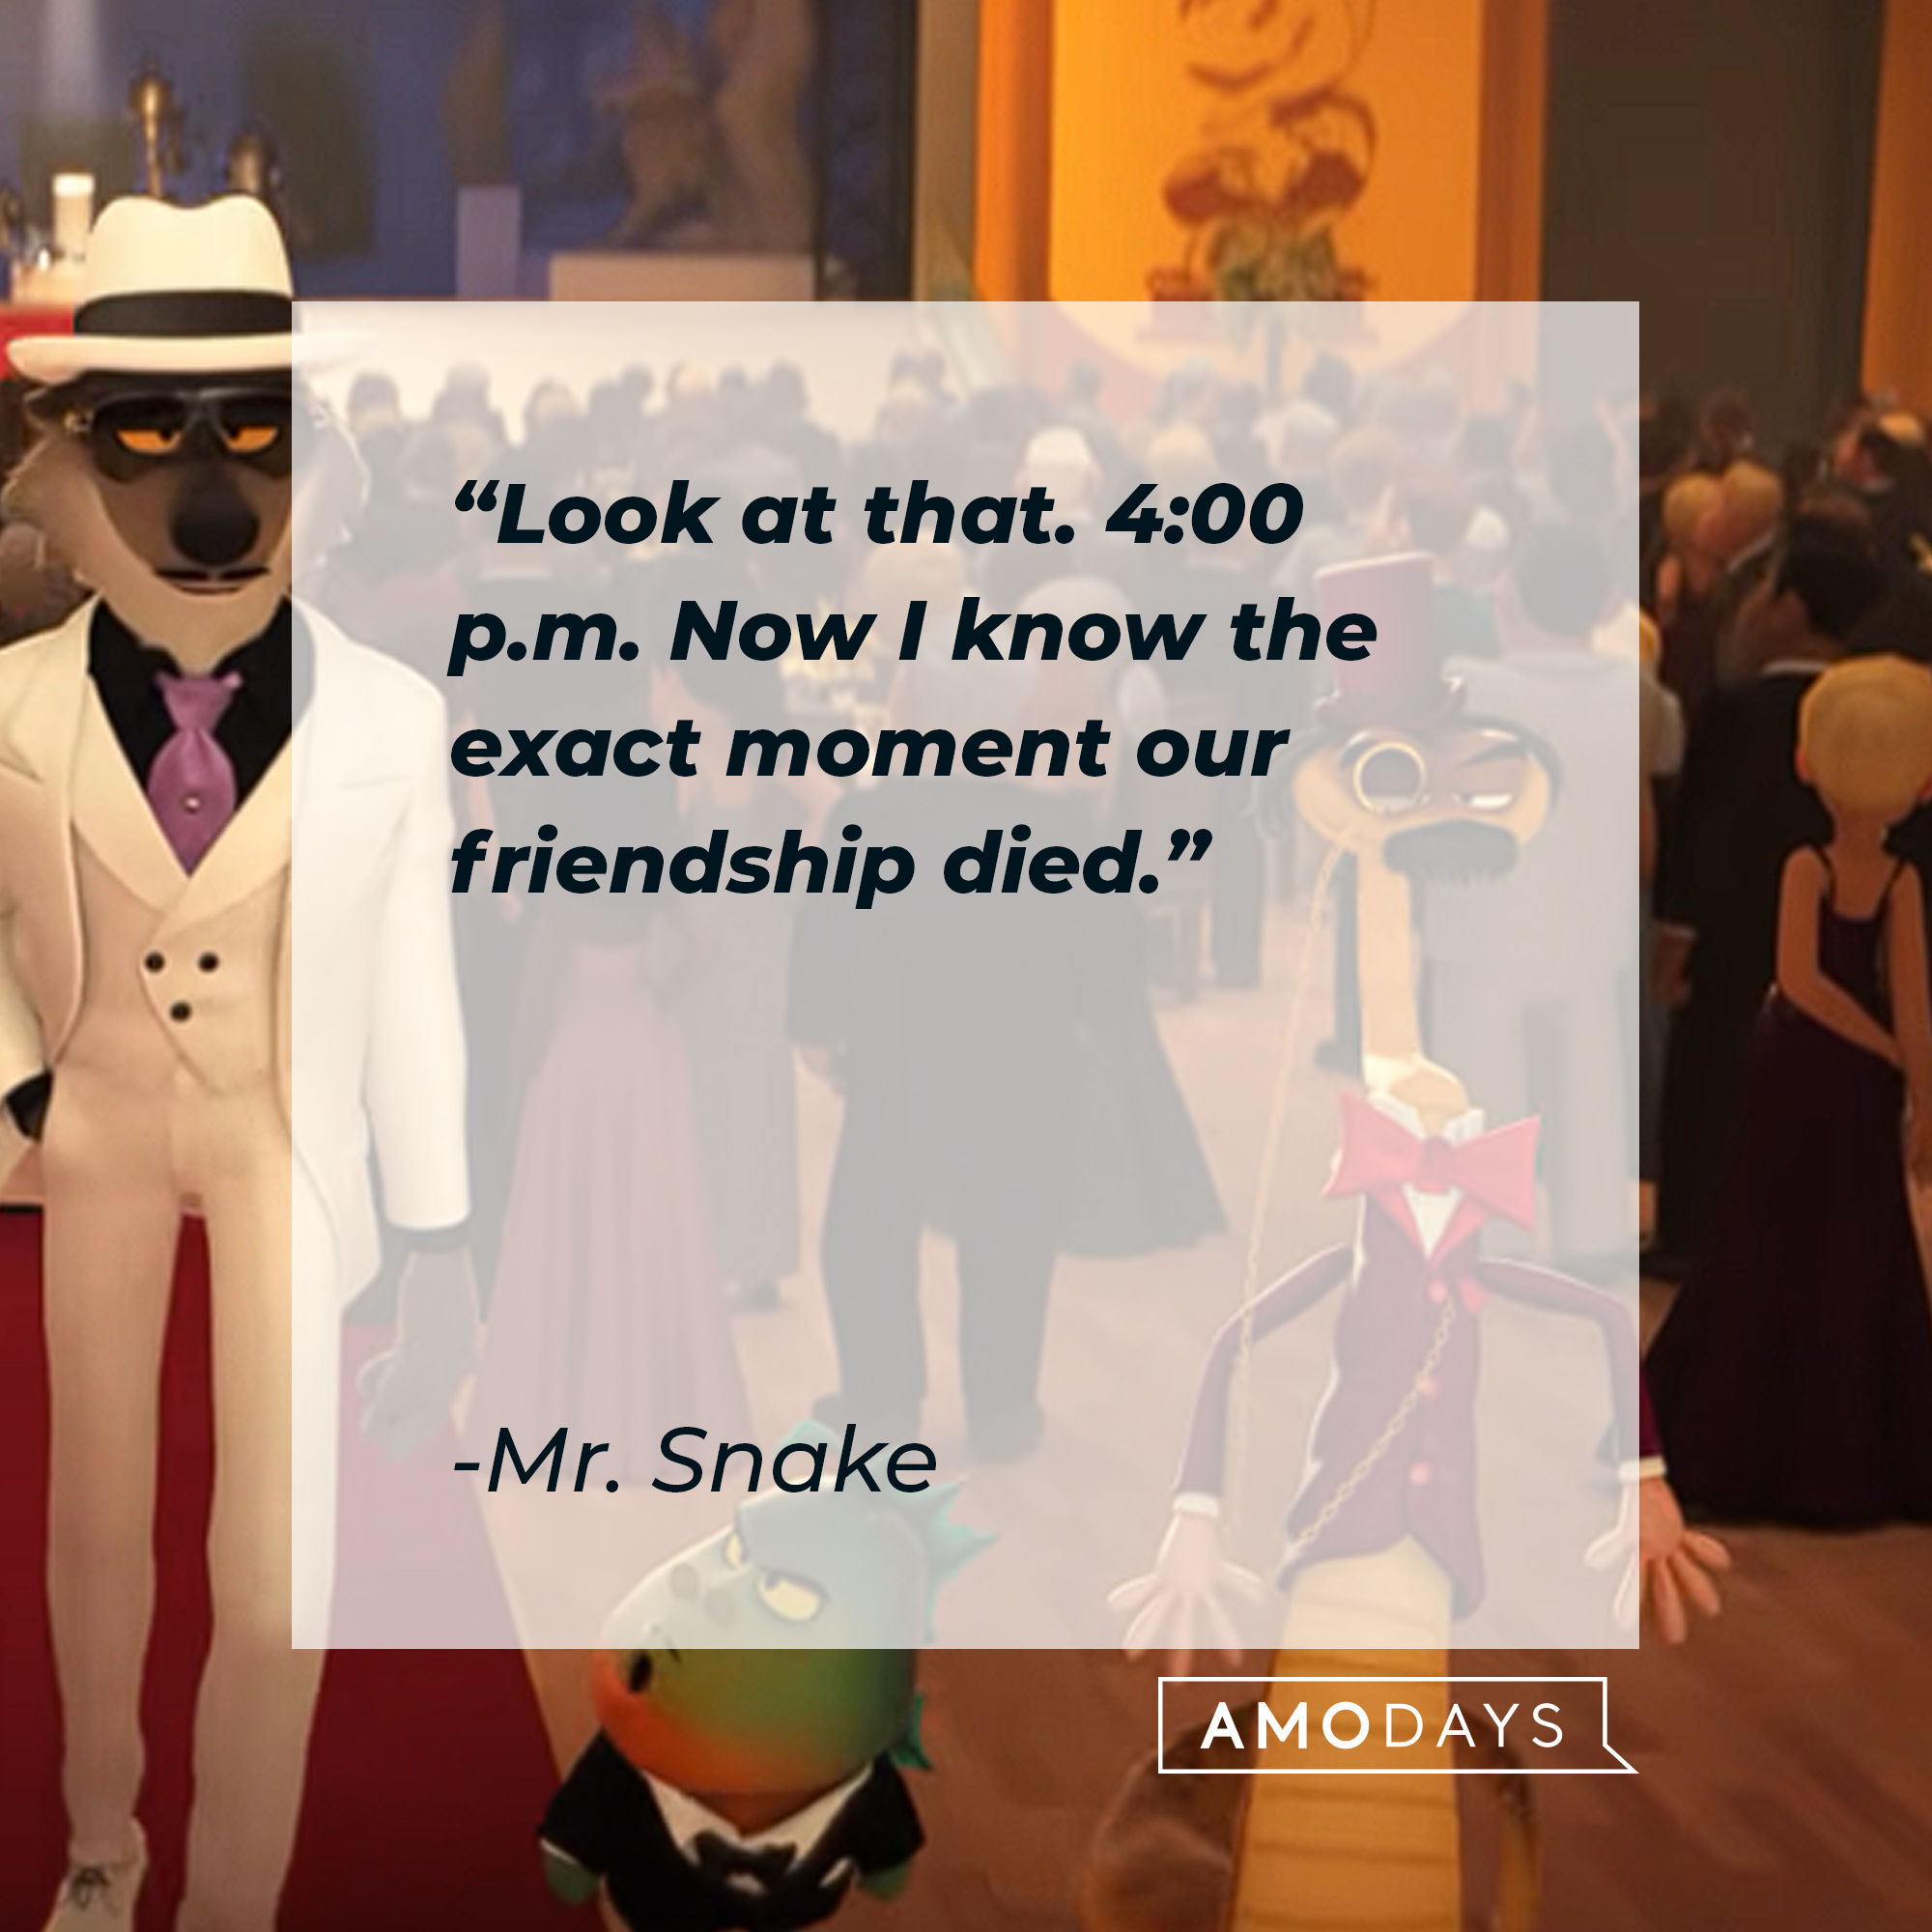 Mr. Snake's quote: "Look at that. 4:00 p.m. Now I know the exact moment our friendship died." | Source: youtube.com/UniversalPictures